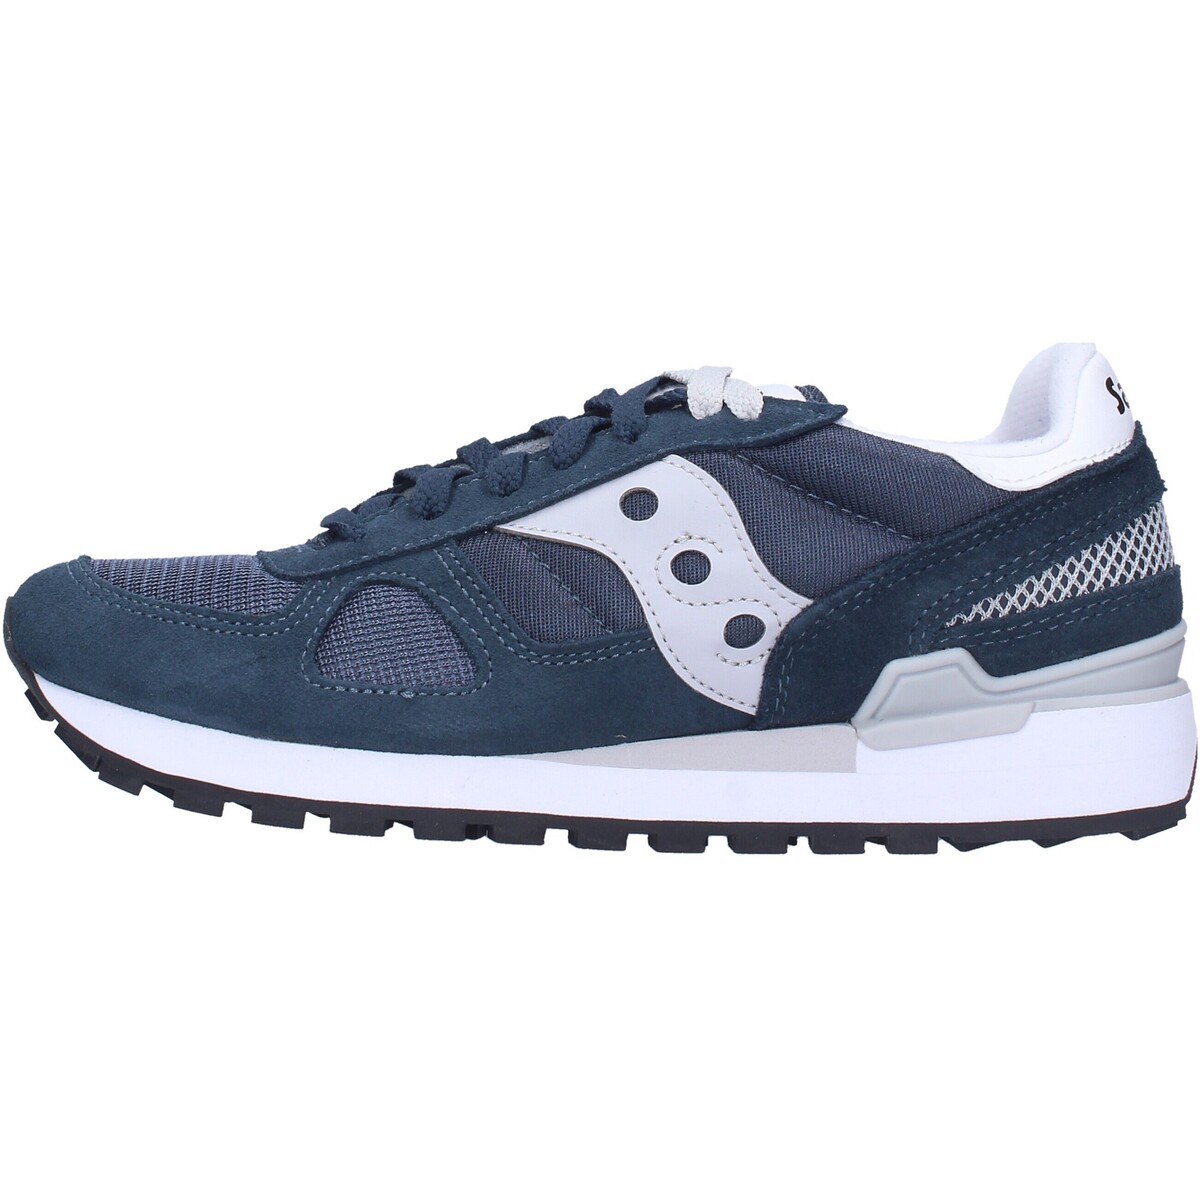 Chaussures Homme Solebox x Saucony 10k Three Brothers Pack S2108-820 Bleu